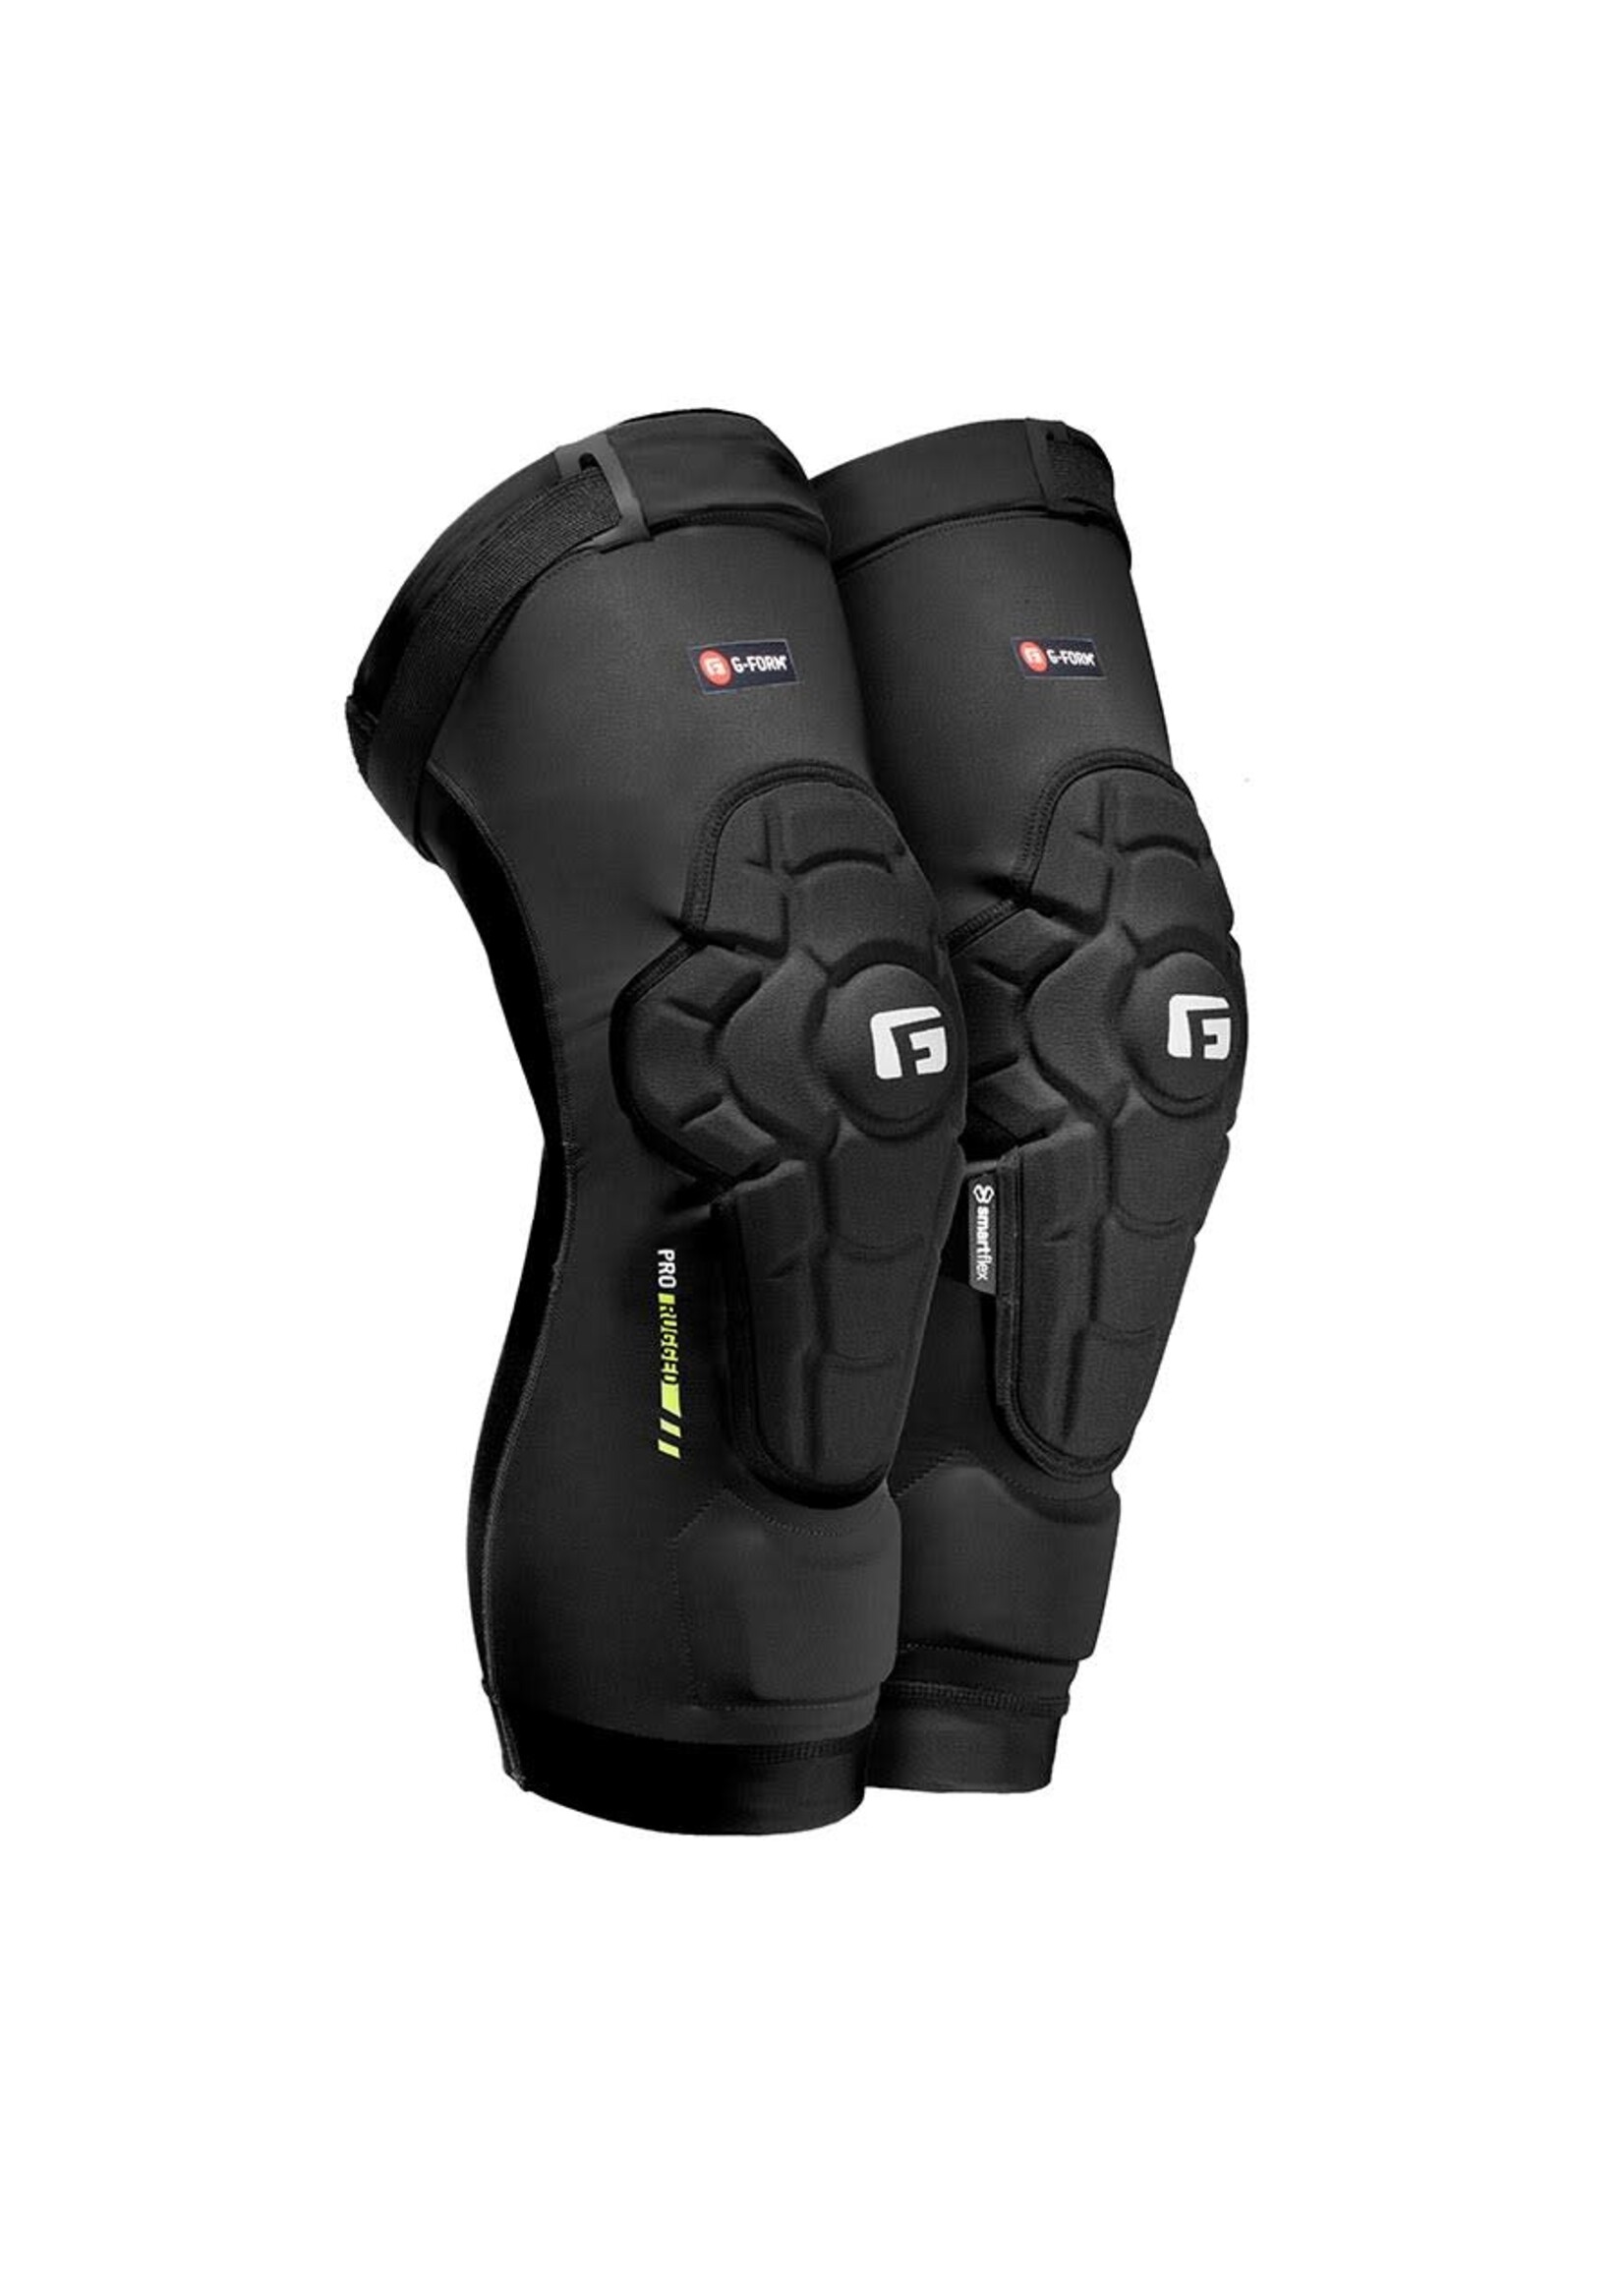 G-Form M Pro-Rugged 2 Knee Guards Black Pair G-Form